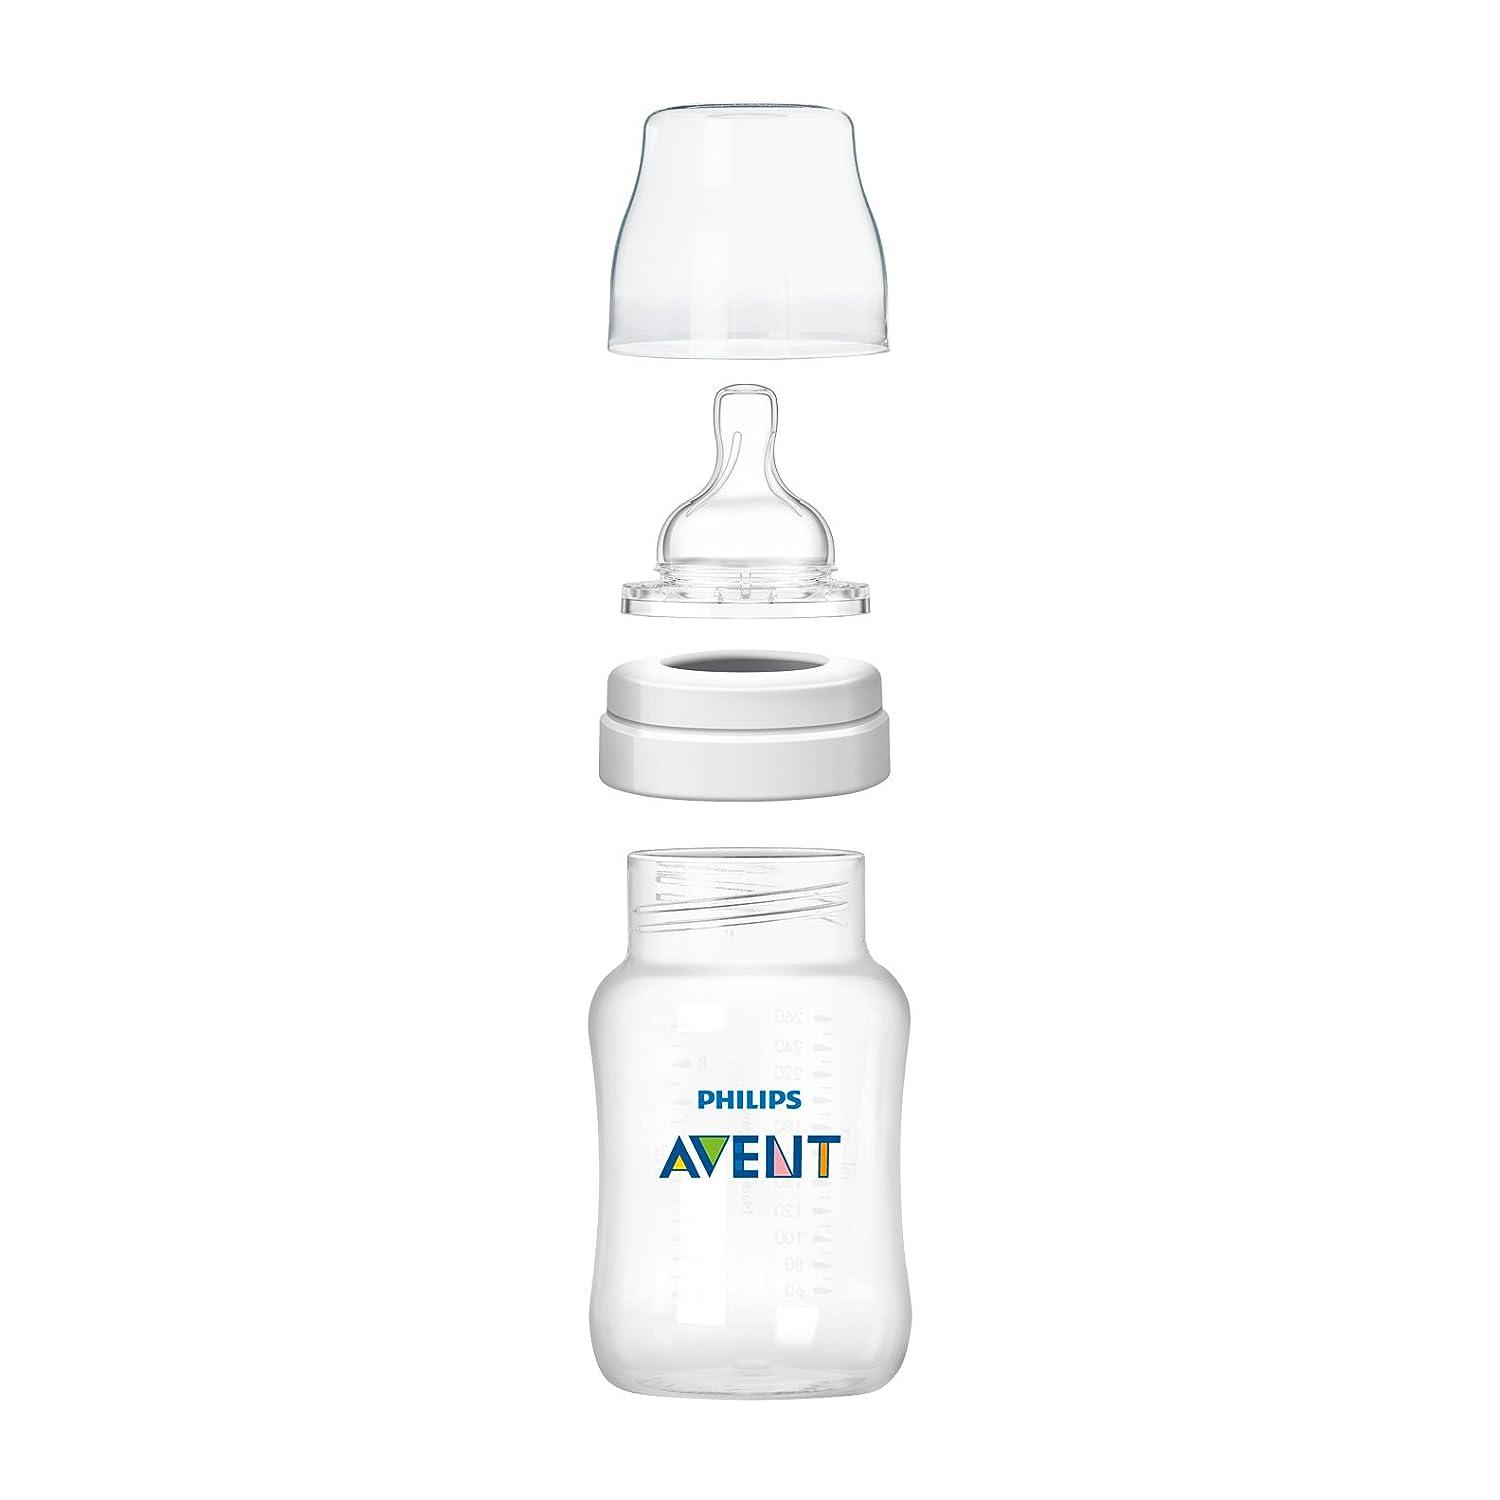 Philips Avent Anti-colic Baby Bottles Clear, 4oz, 3 Piece